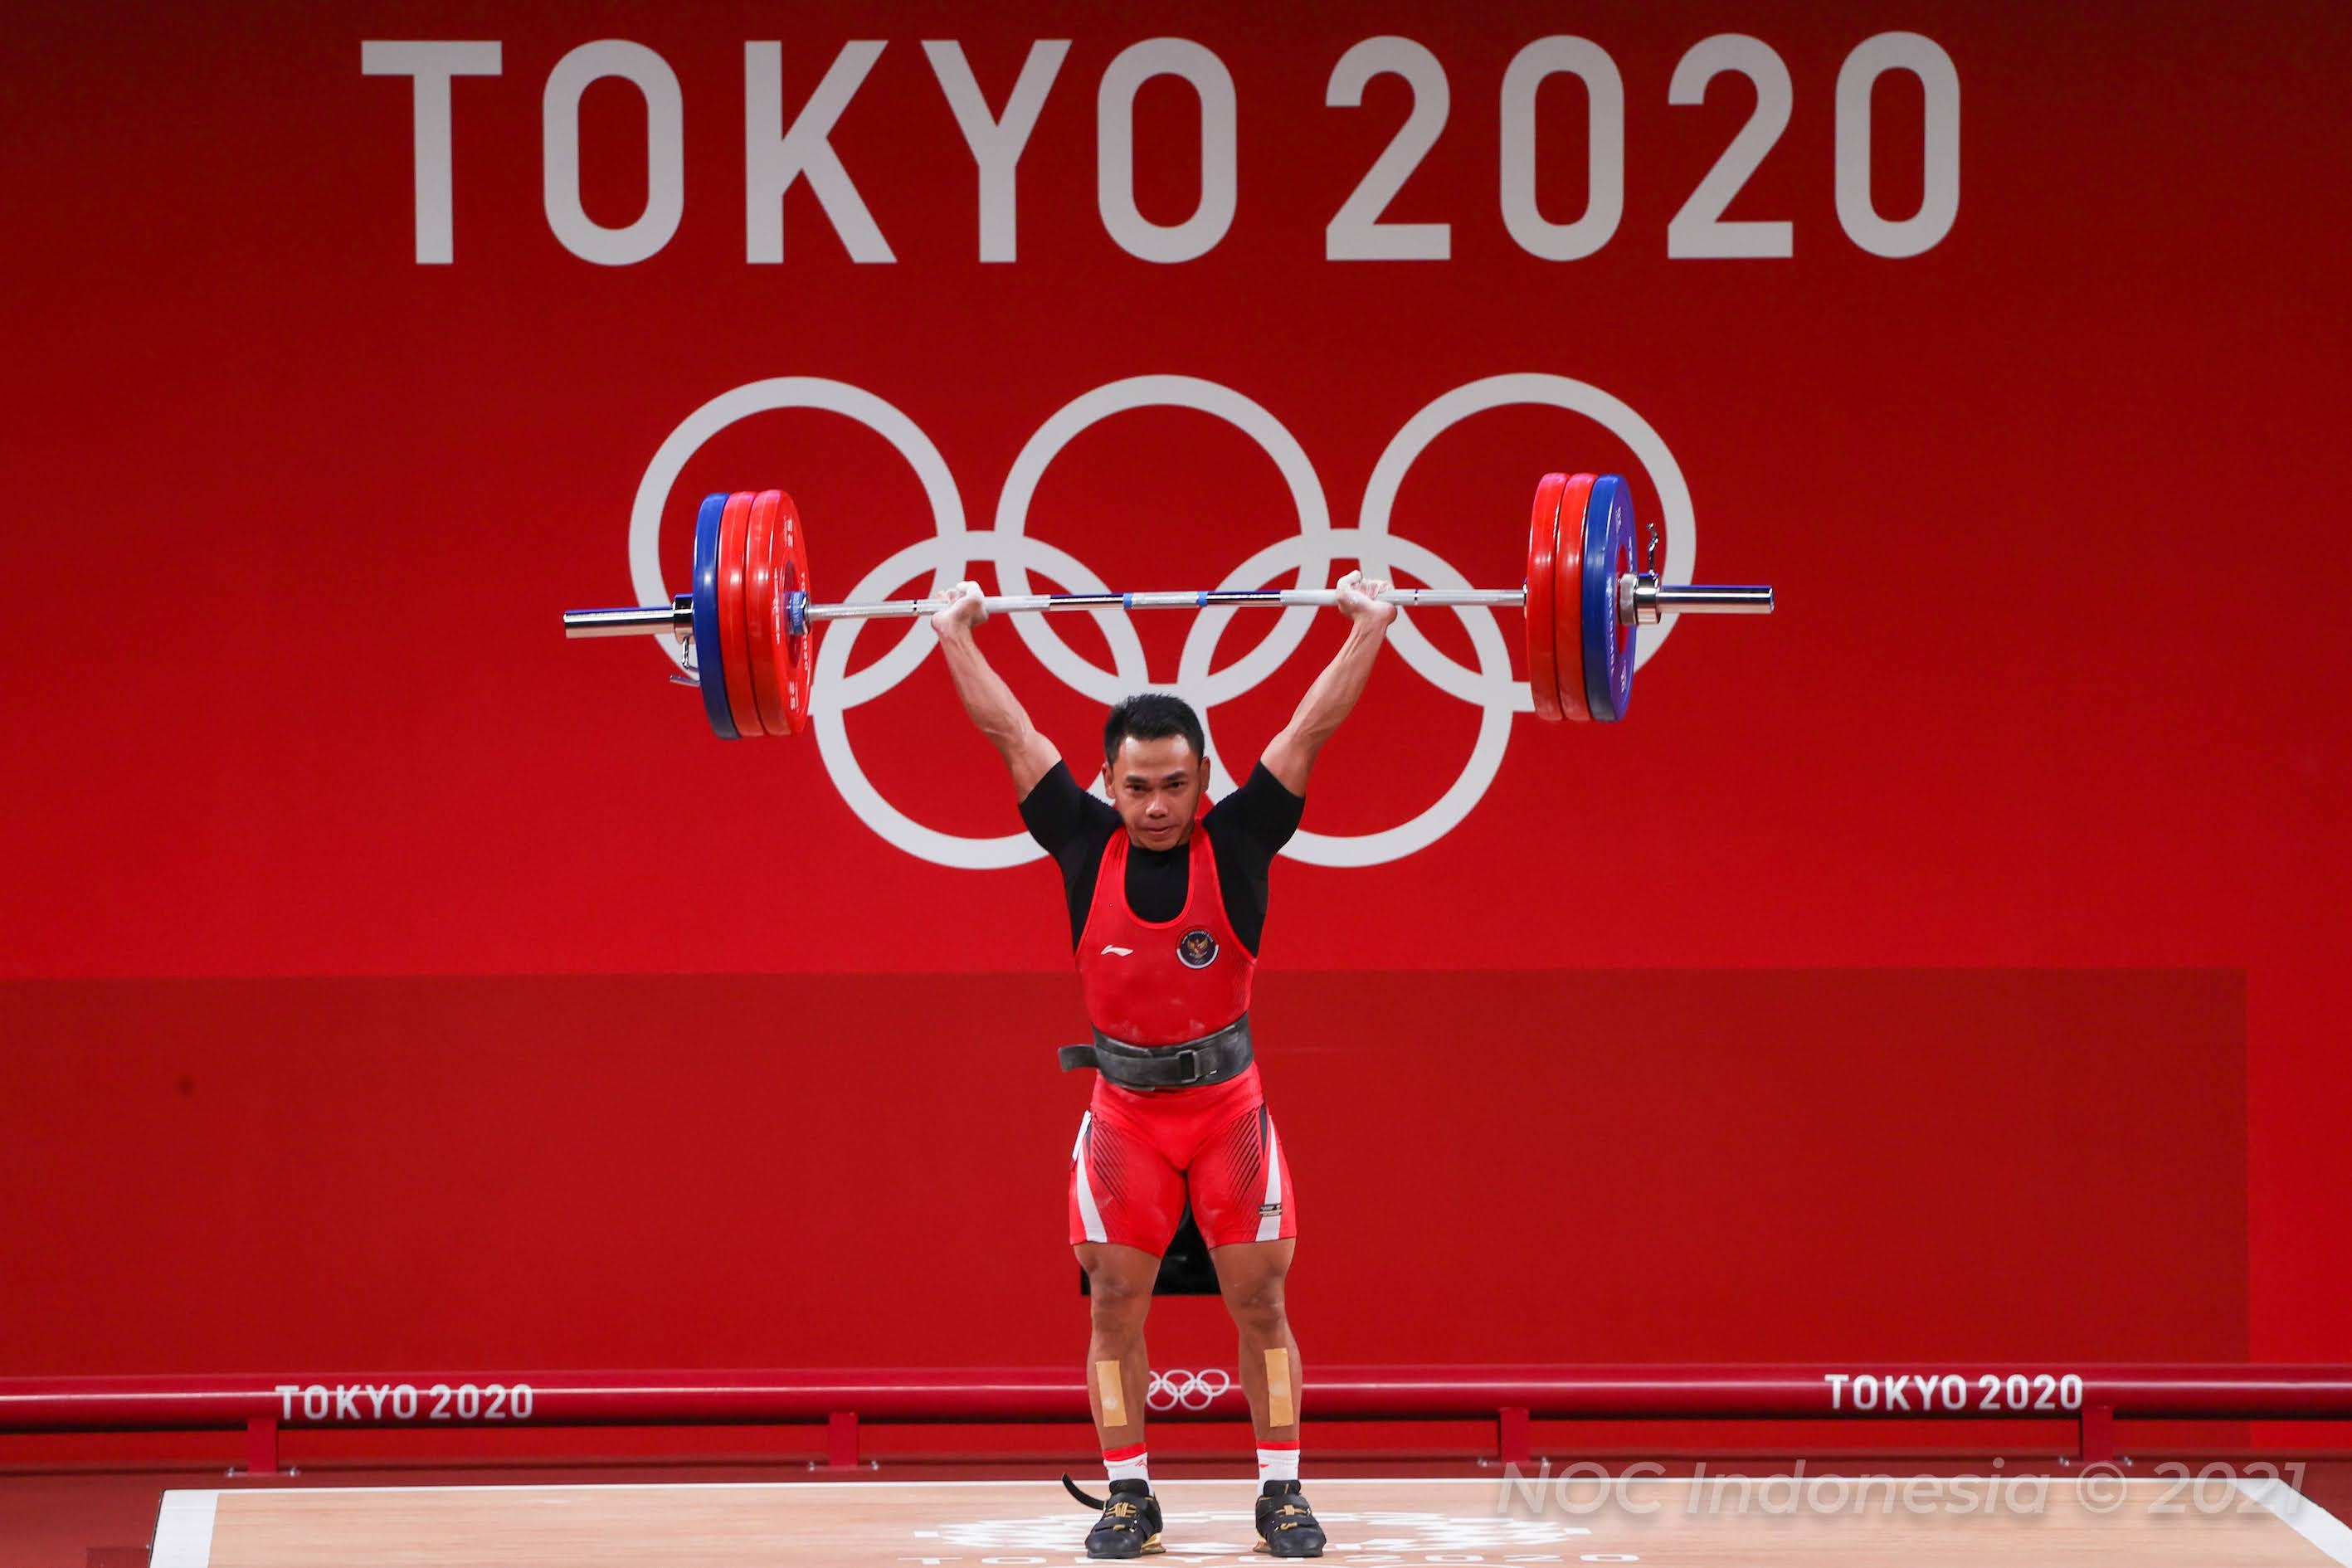 Indonesia Olympic Commitee - Eko Yuli Irawan Clinches Quintrick to Qualify for Olympics, Paris 2024 Marks Fifth Appearance